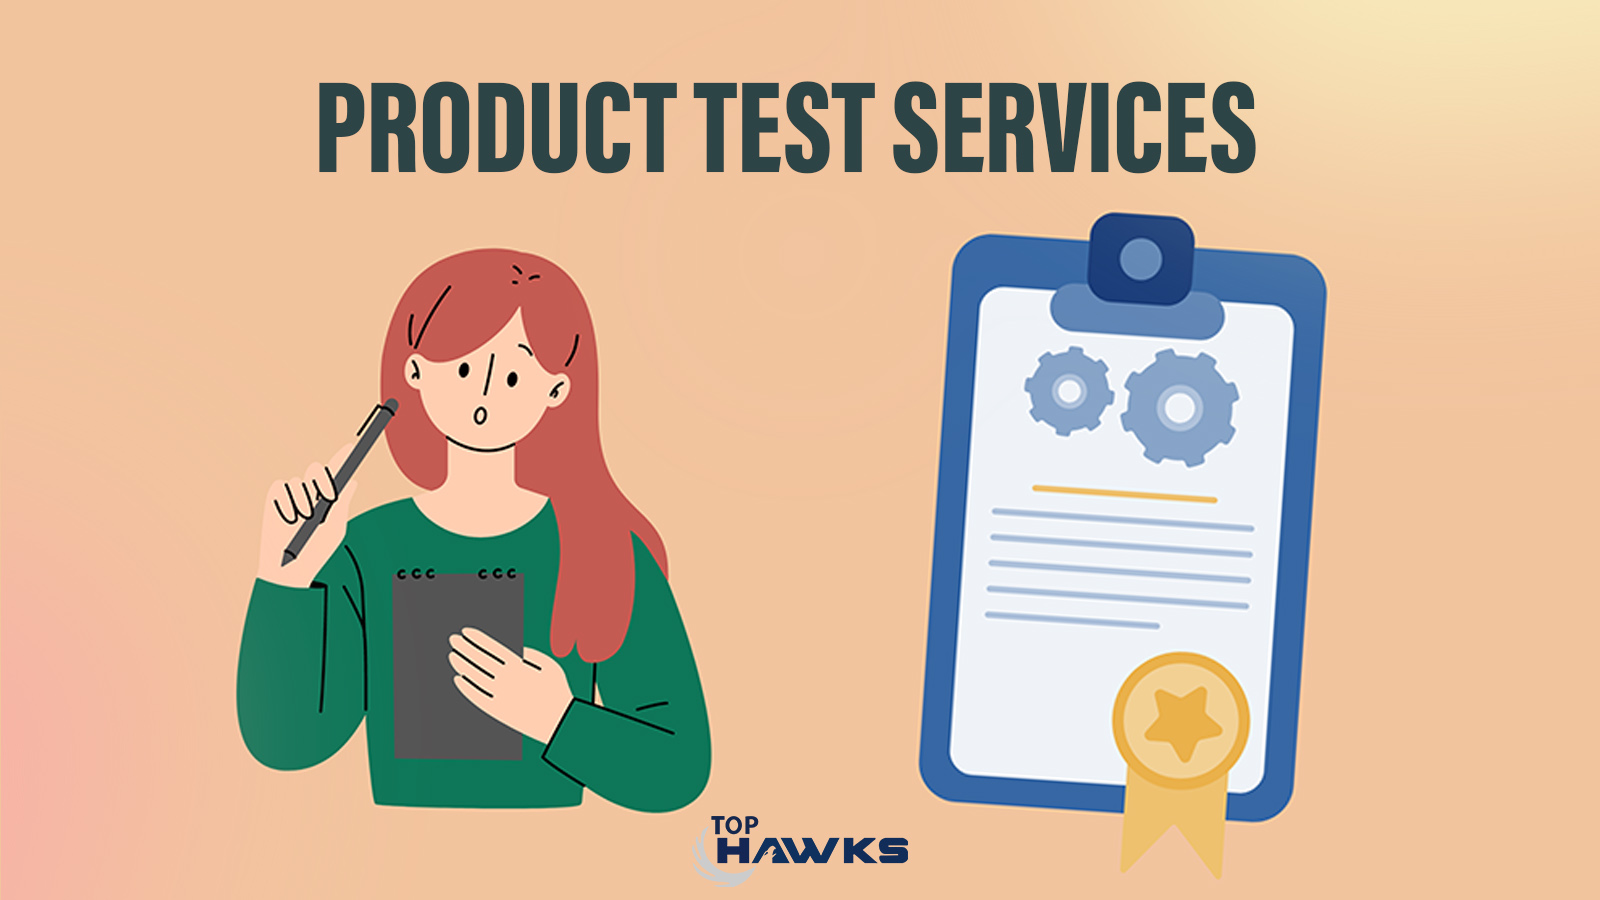 Image depicting Product test services